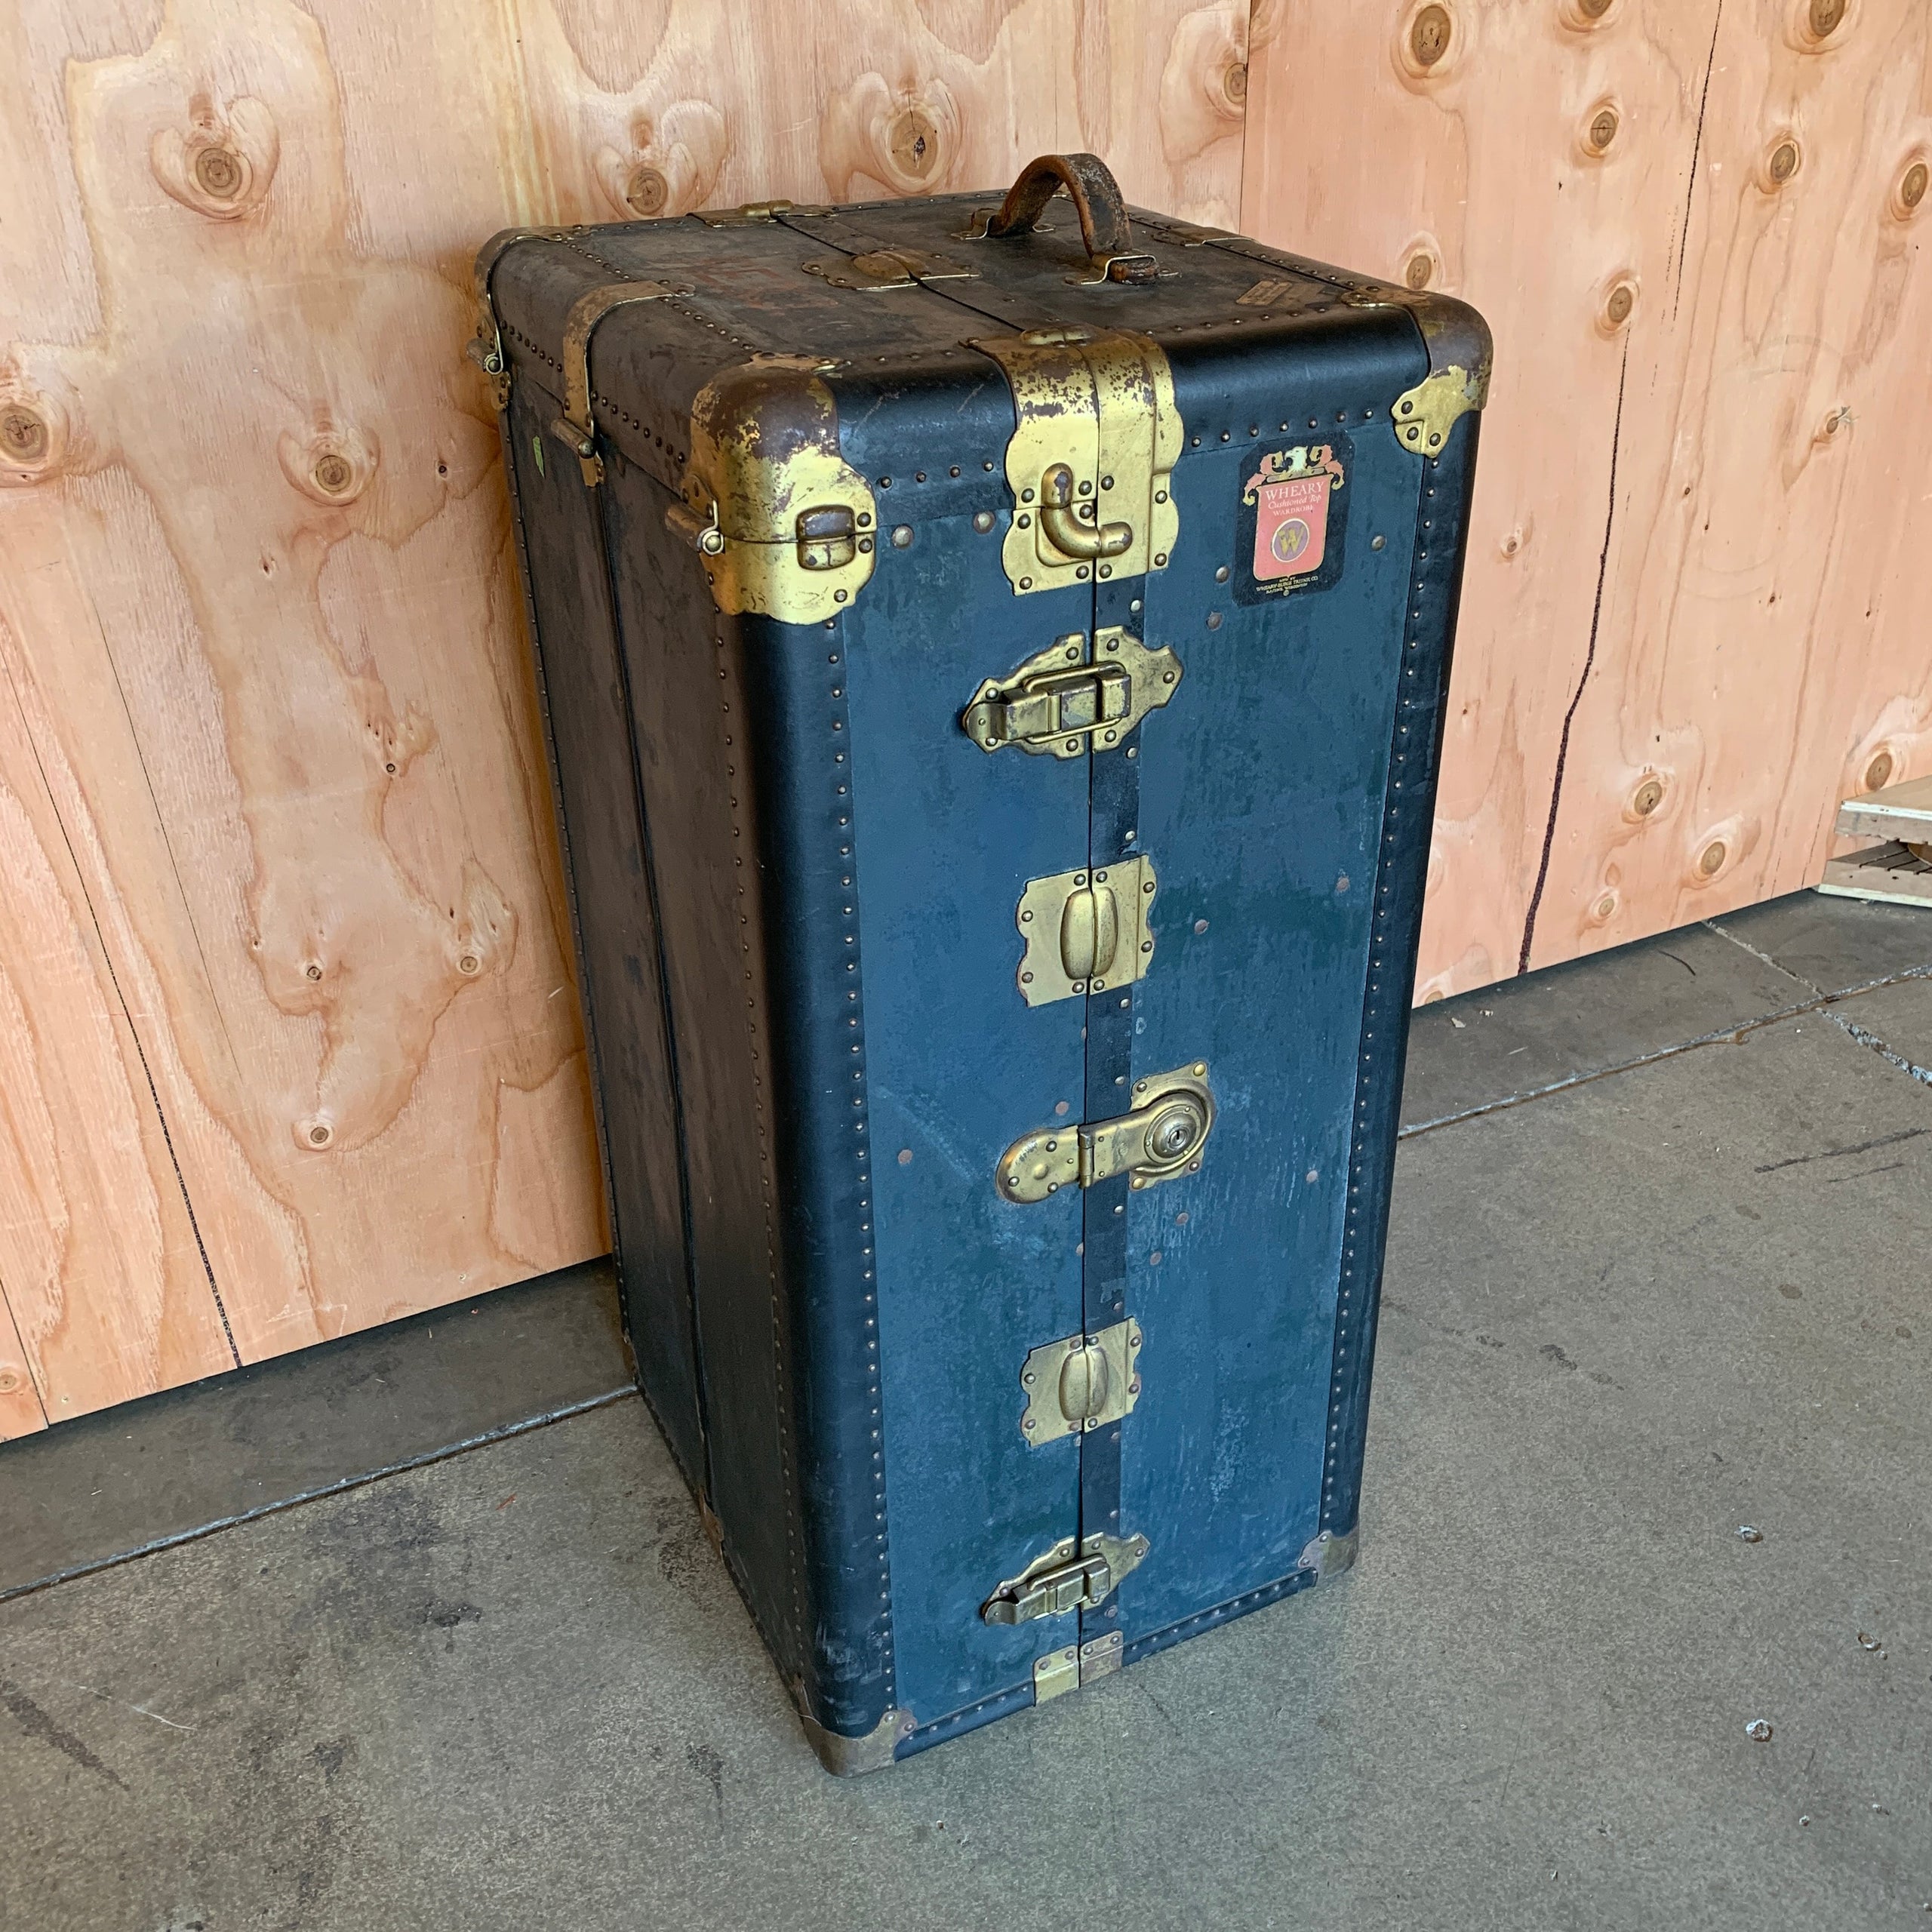 Antique Wheary Cushioned Top Wardrobe Trunk - Chests & Trunks - Pequot  Lakes, Minnesota, Facebook Marketplace